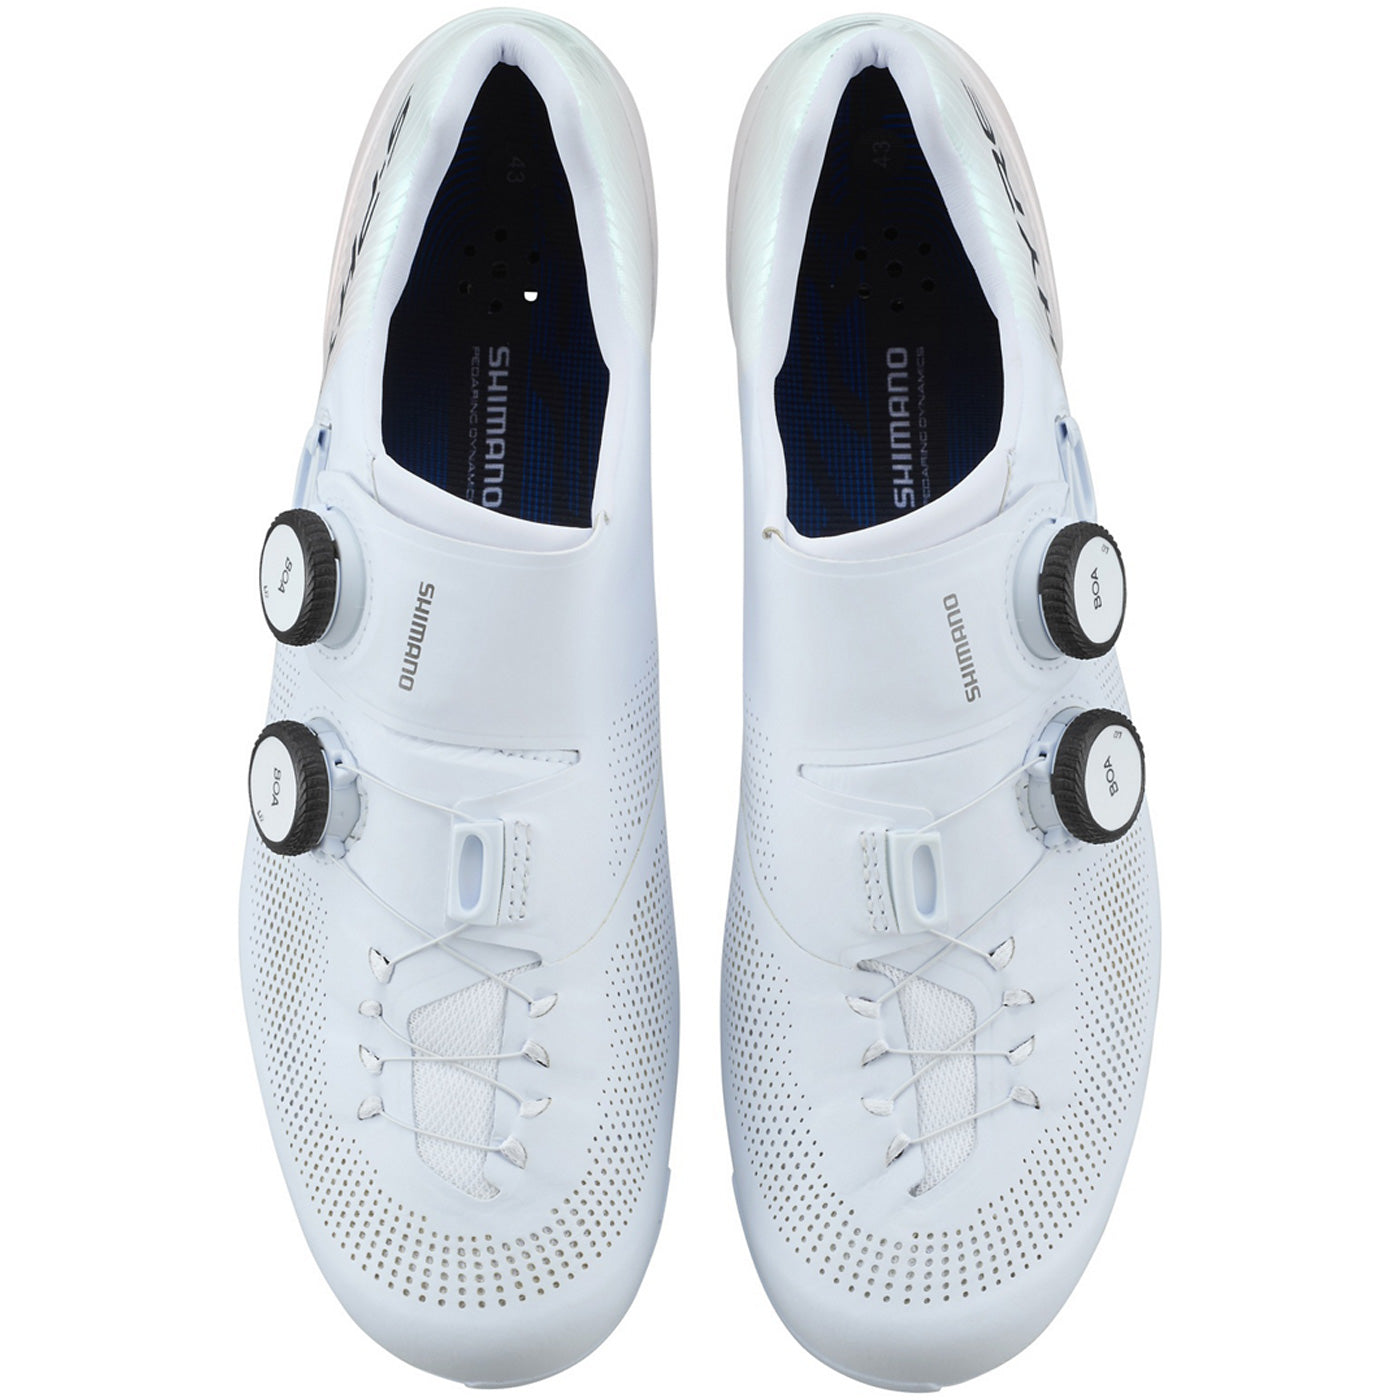 Shimano S-Phyre RC903 shoes - White